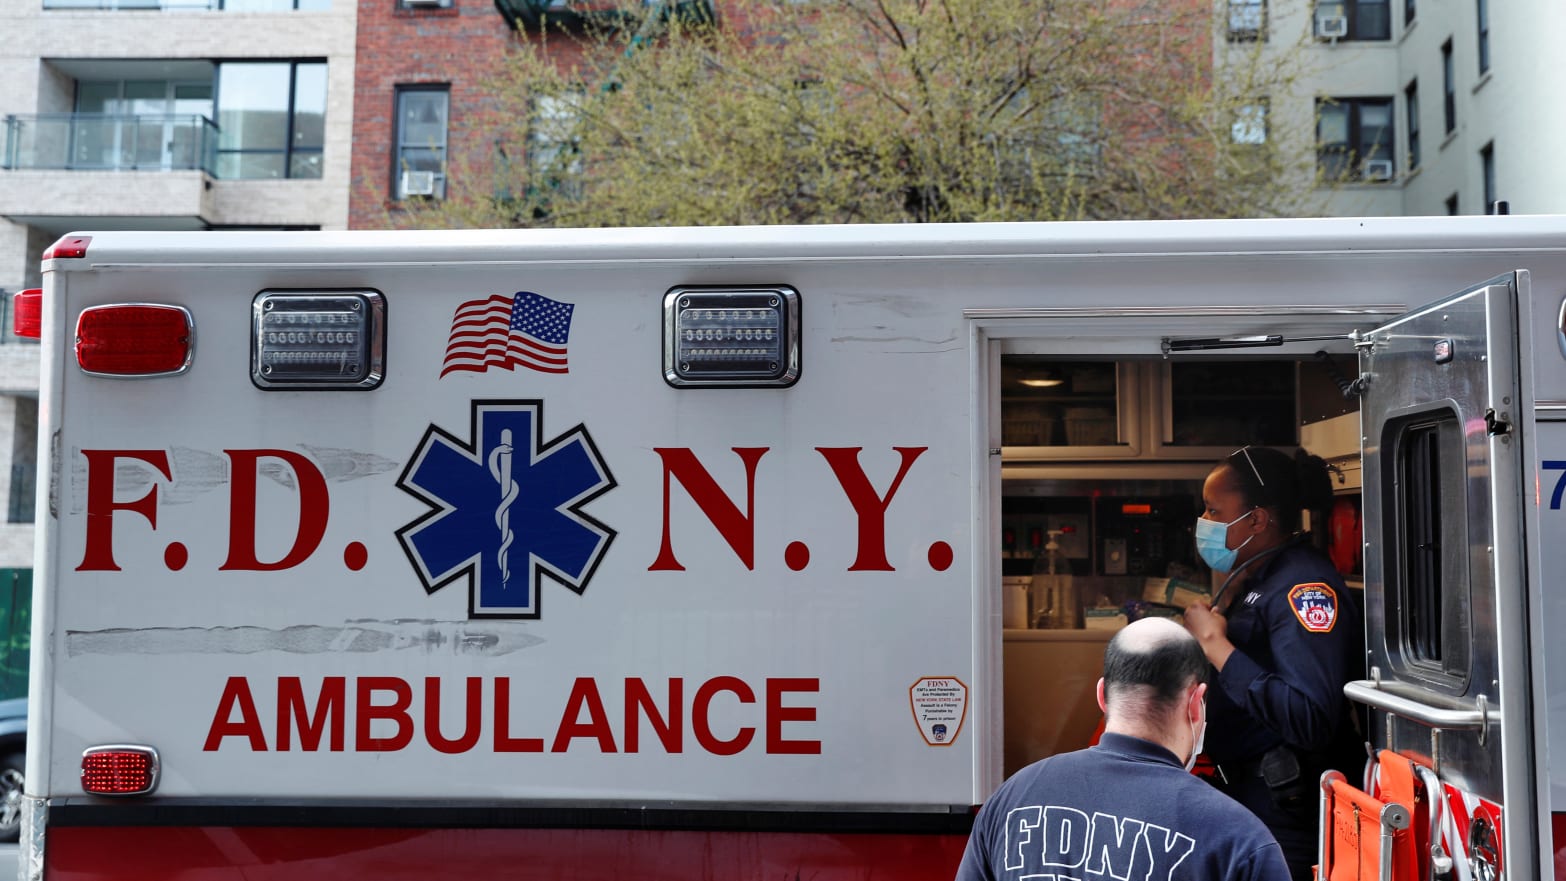 A FDNY ambulance sits with a door open.